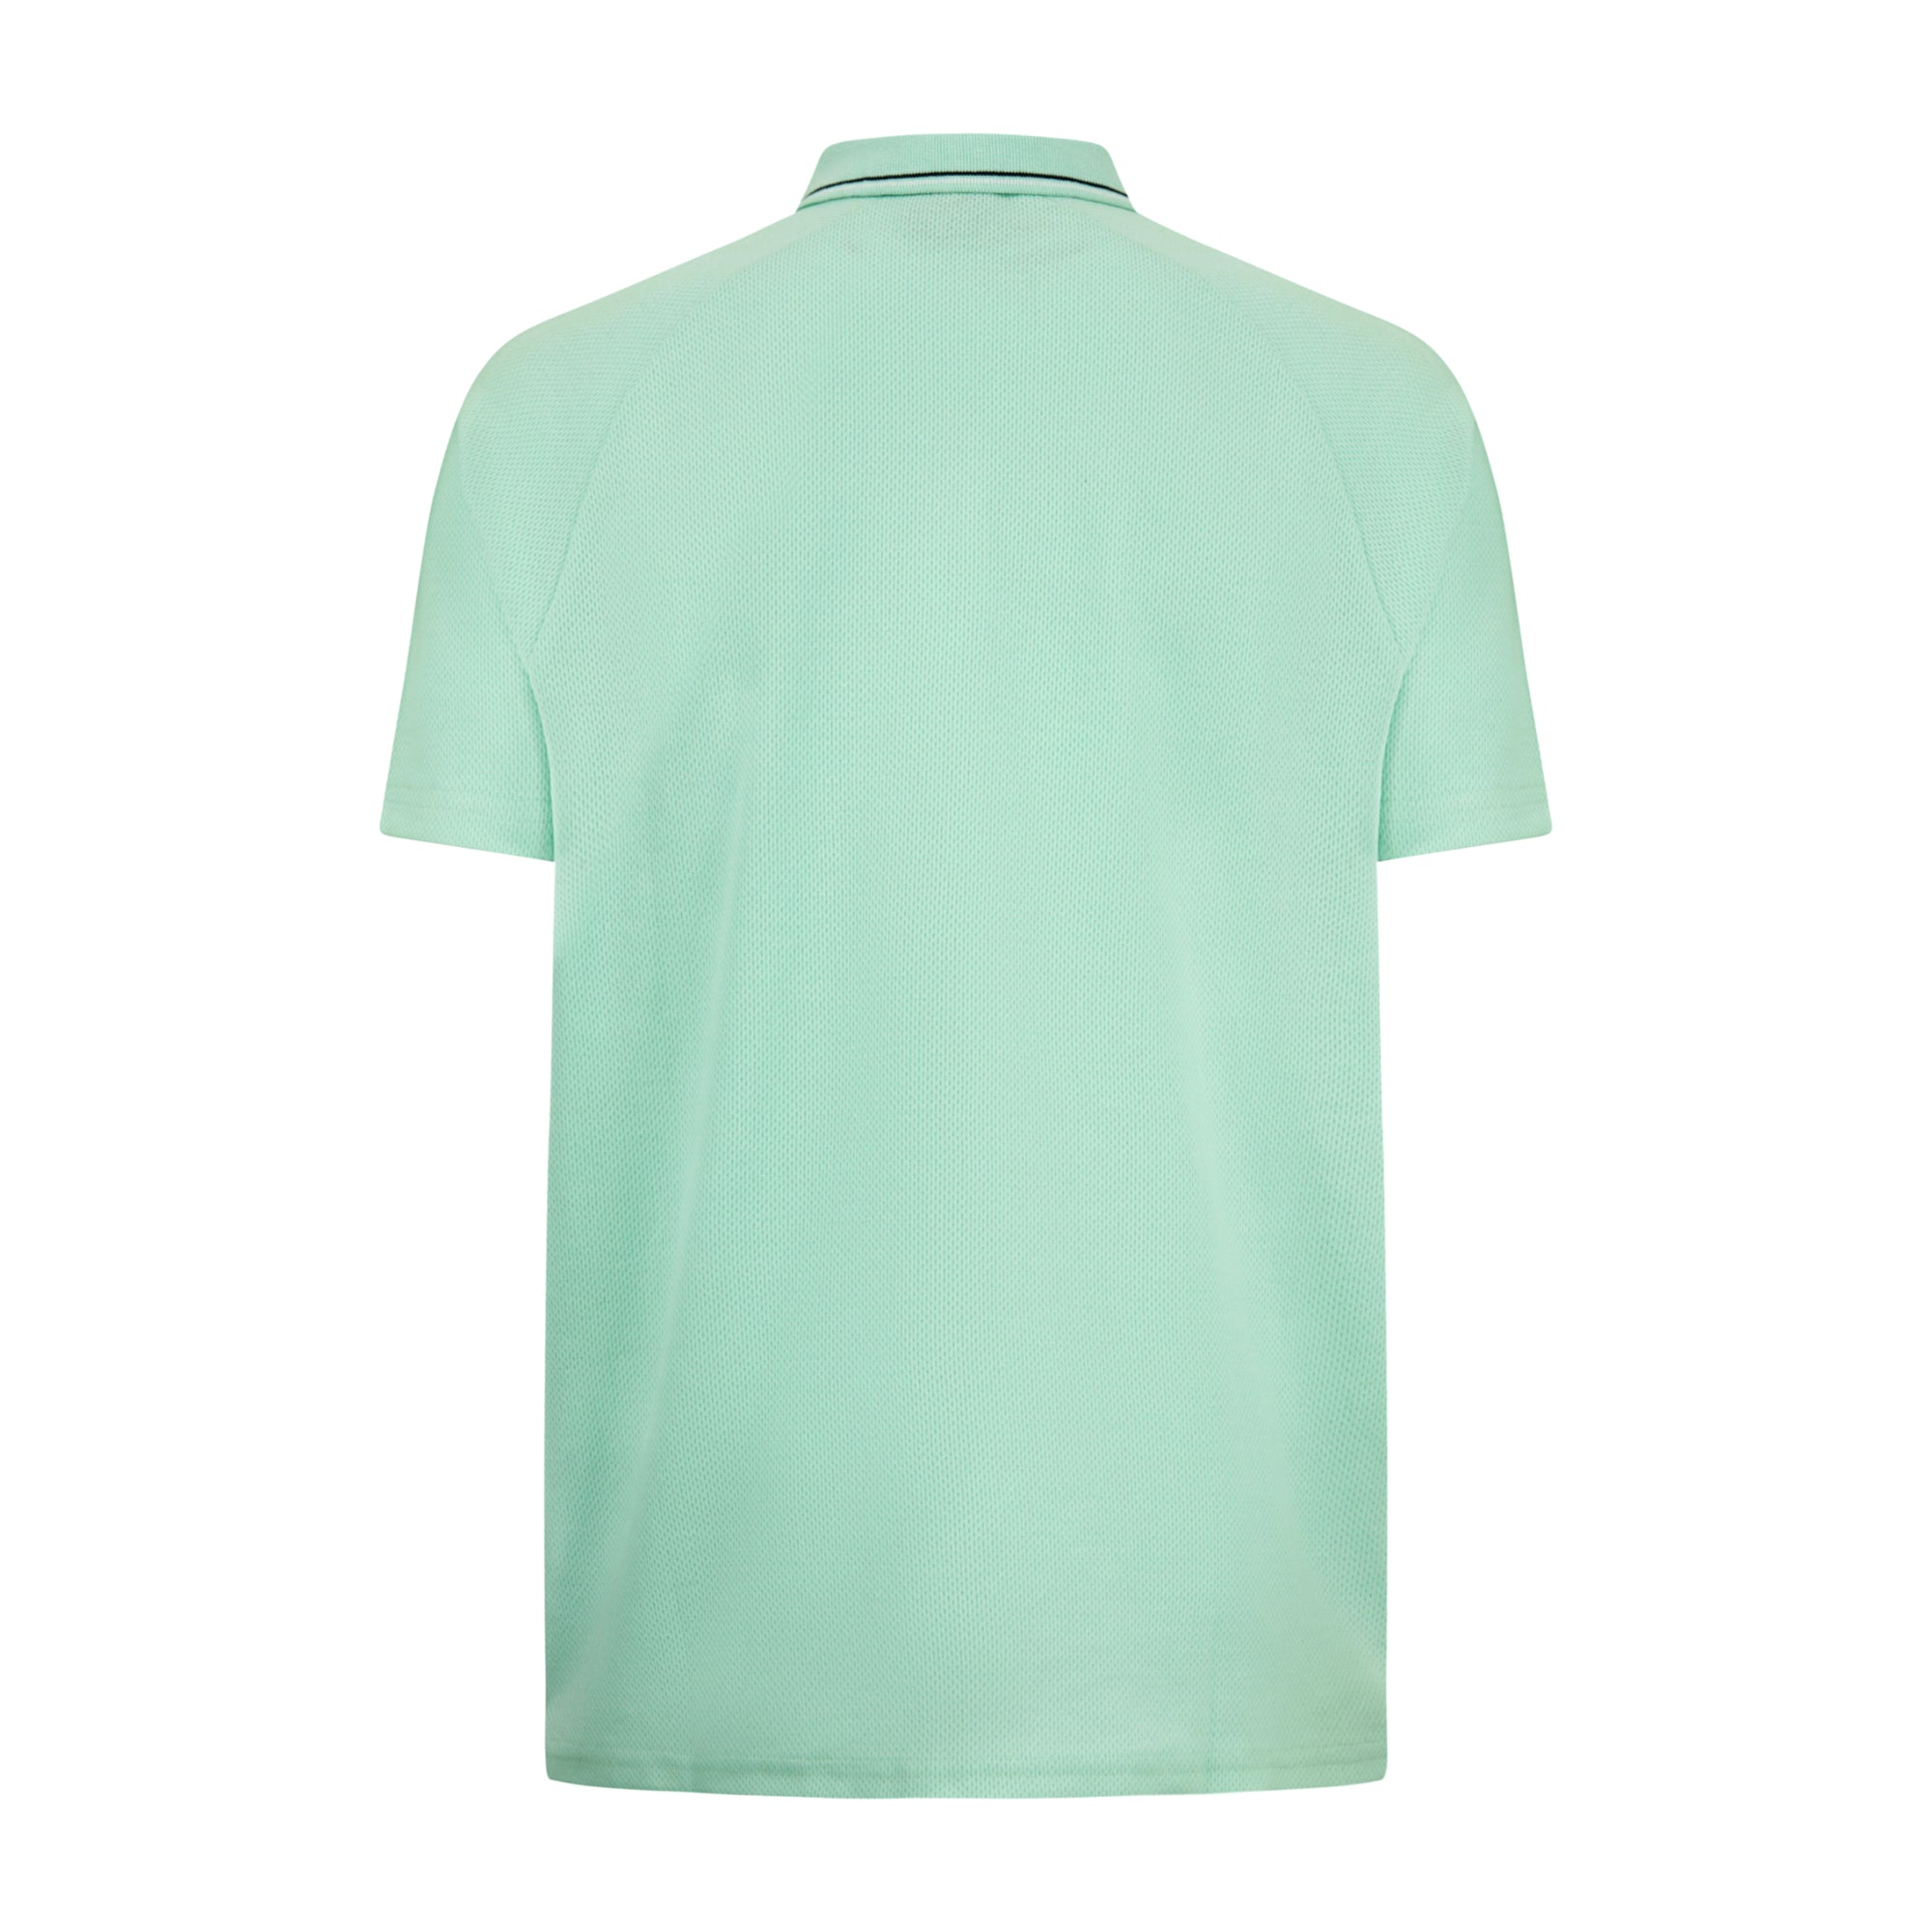 2023 Ryder Cup Men's Mint Green Polo Shirt - Front